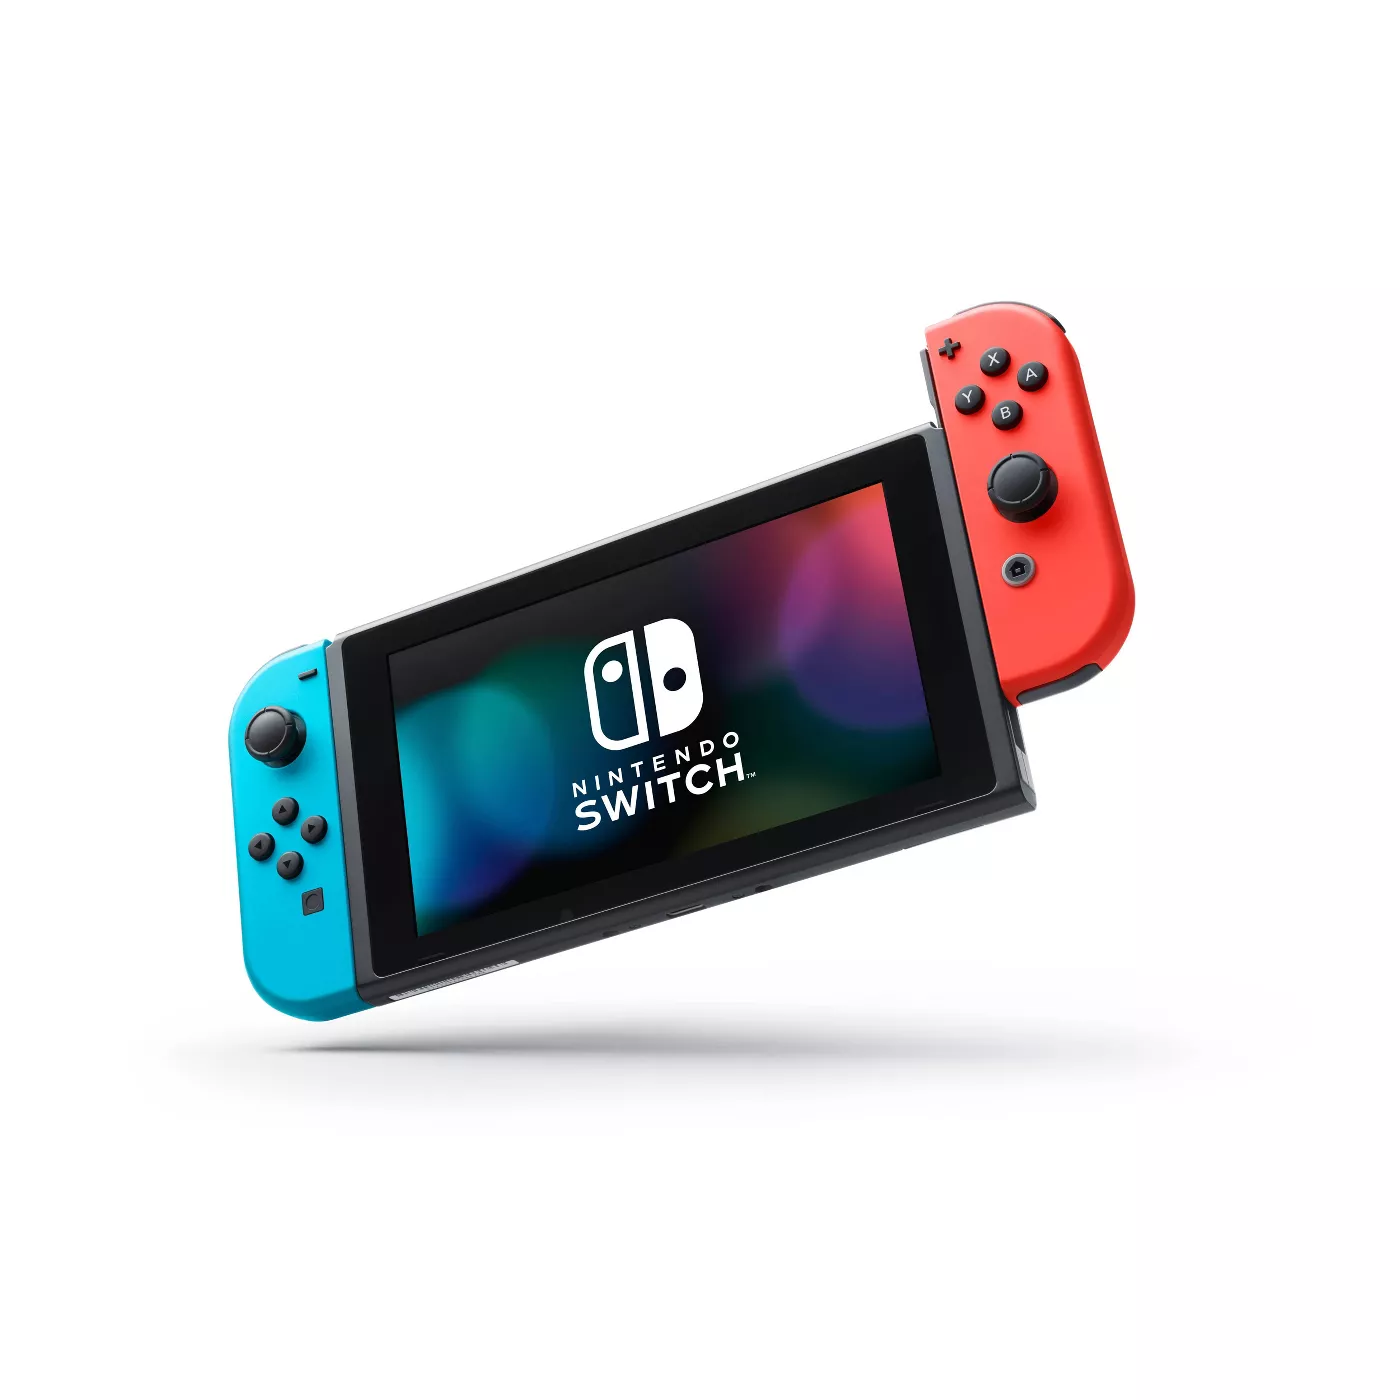 Nintendo Switch with Neon Blue and Neon Red Joy-Con - image 3 of 11